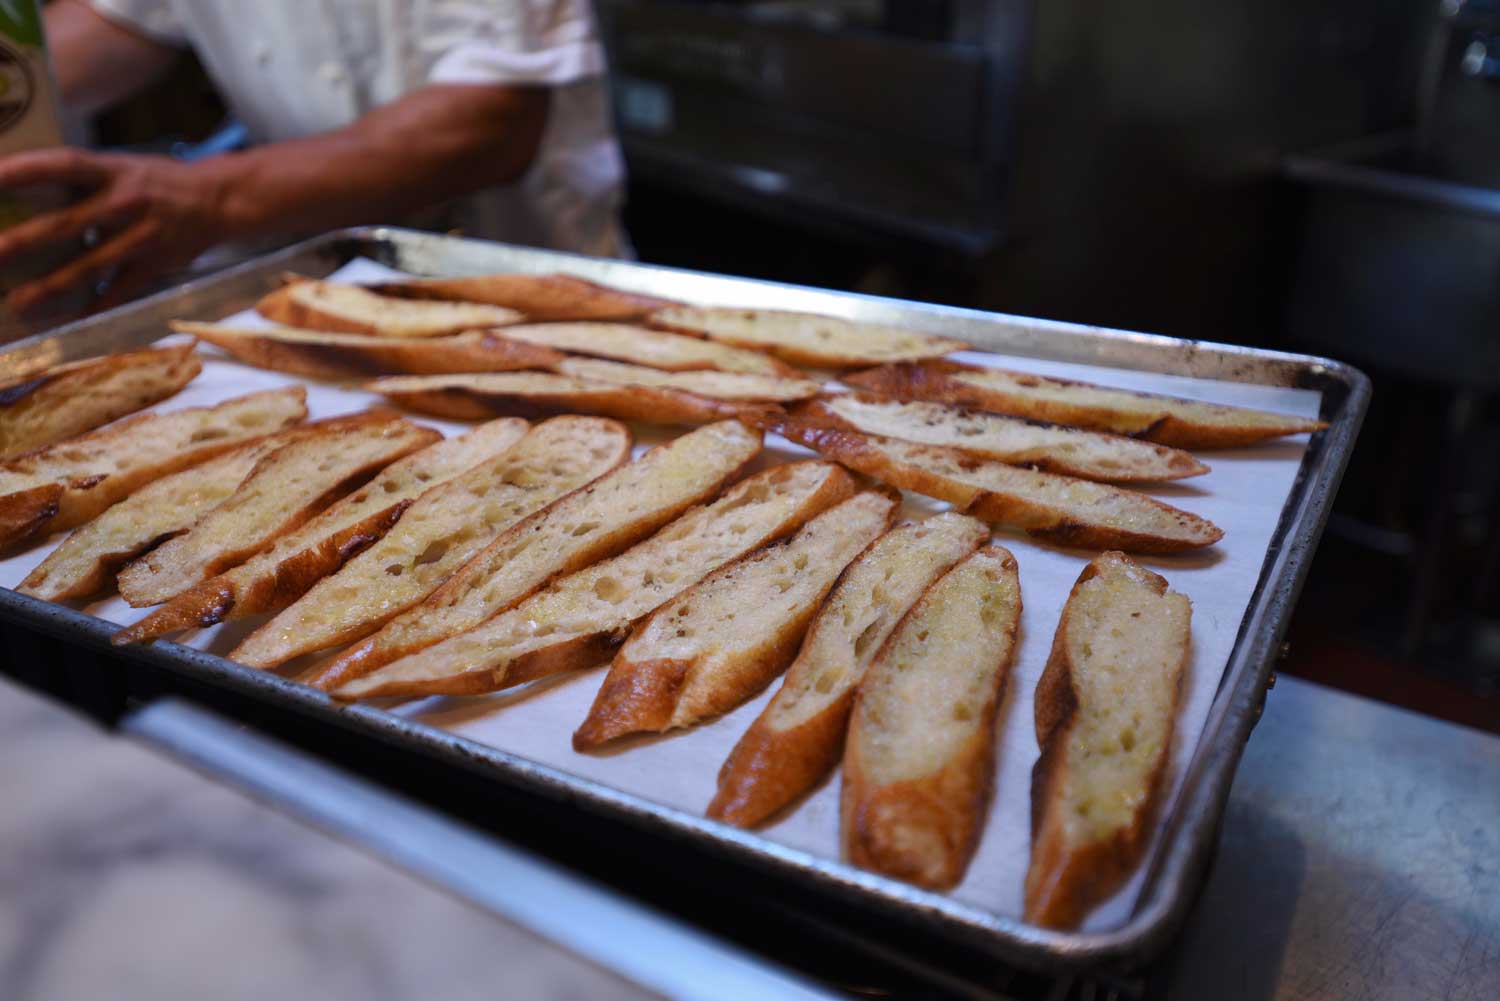 Italian loaves are sliced and drizzled with olive oil in preparation for dinner at Delfina